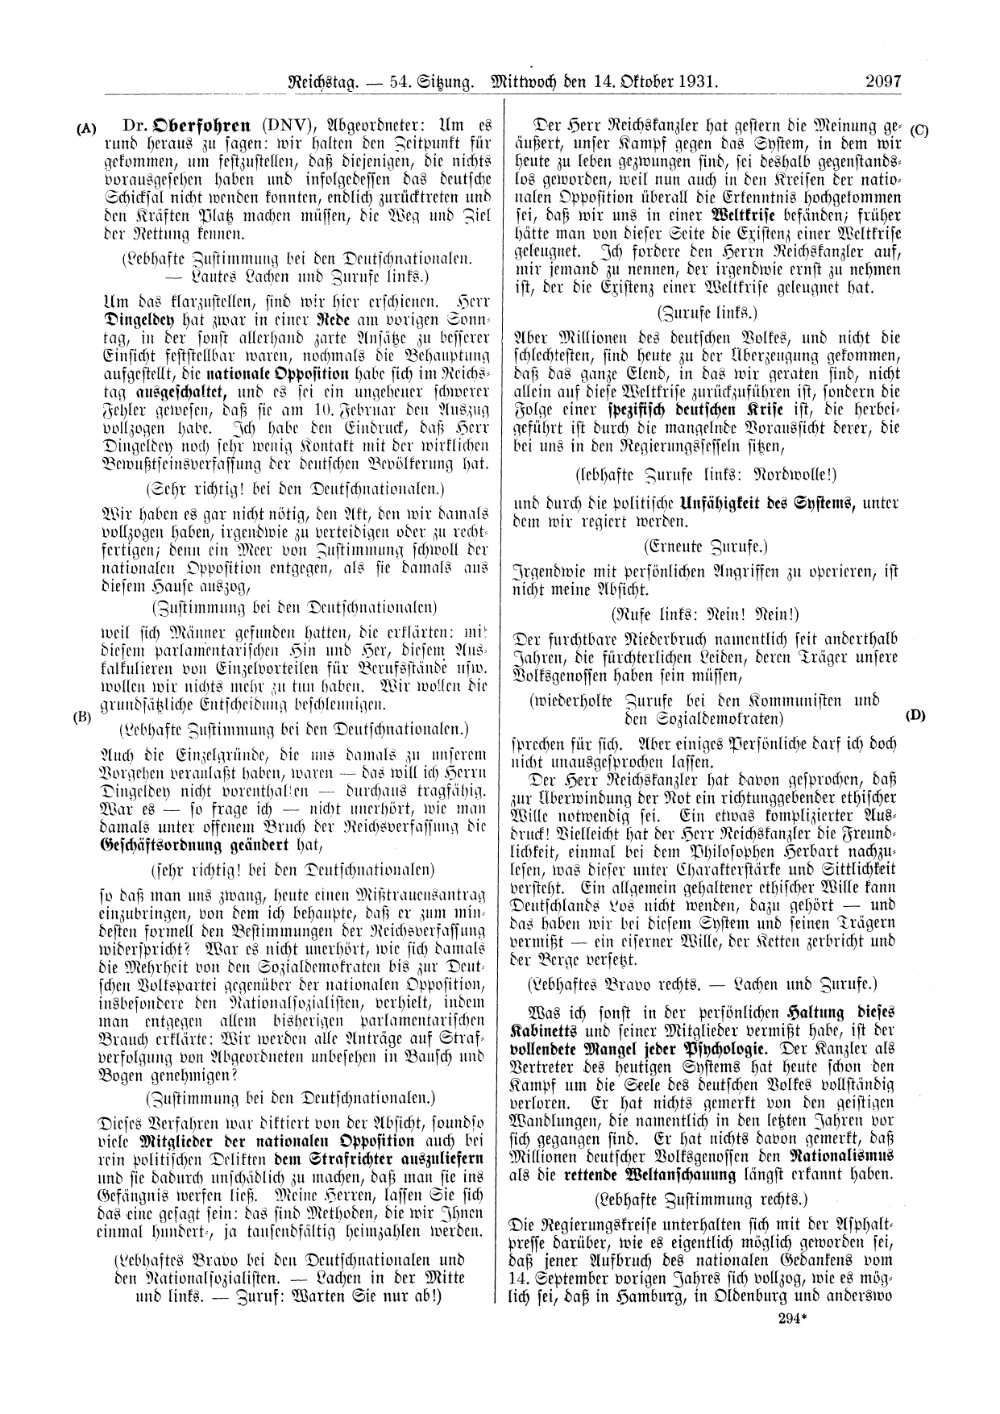 Scan of page 2097